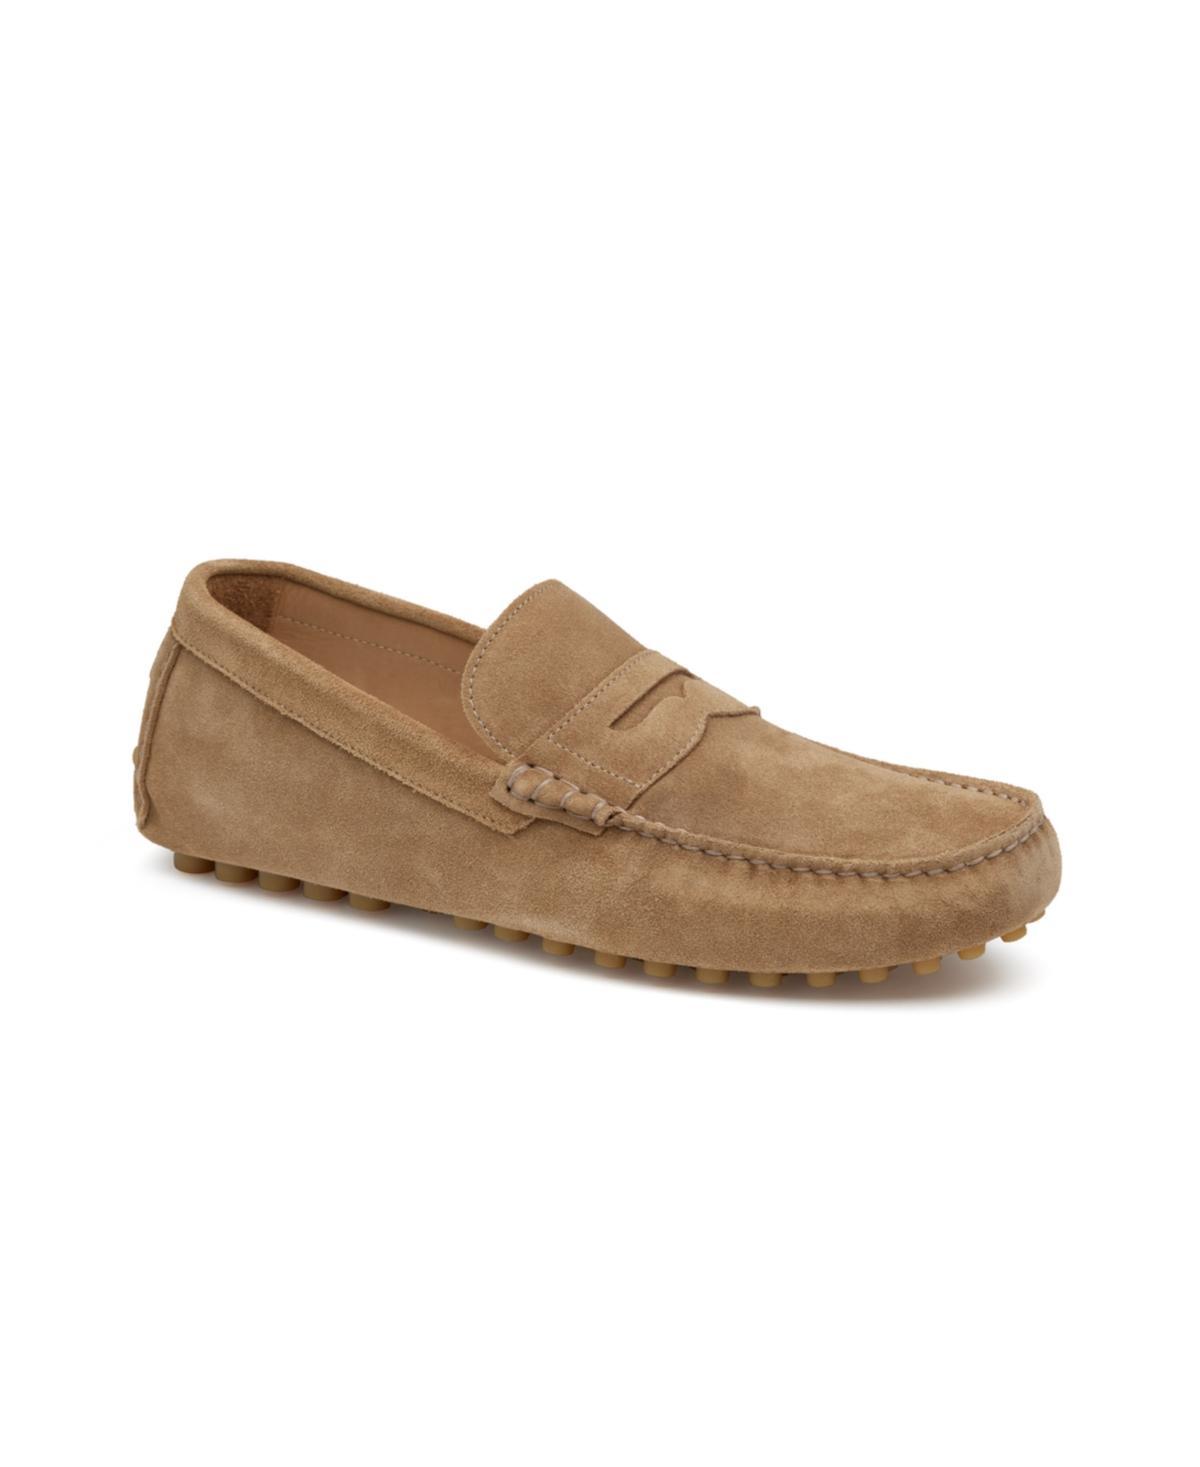 Johnston & Murphy Athens Penny Driving Loafer Product Image